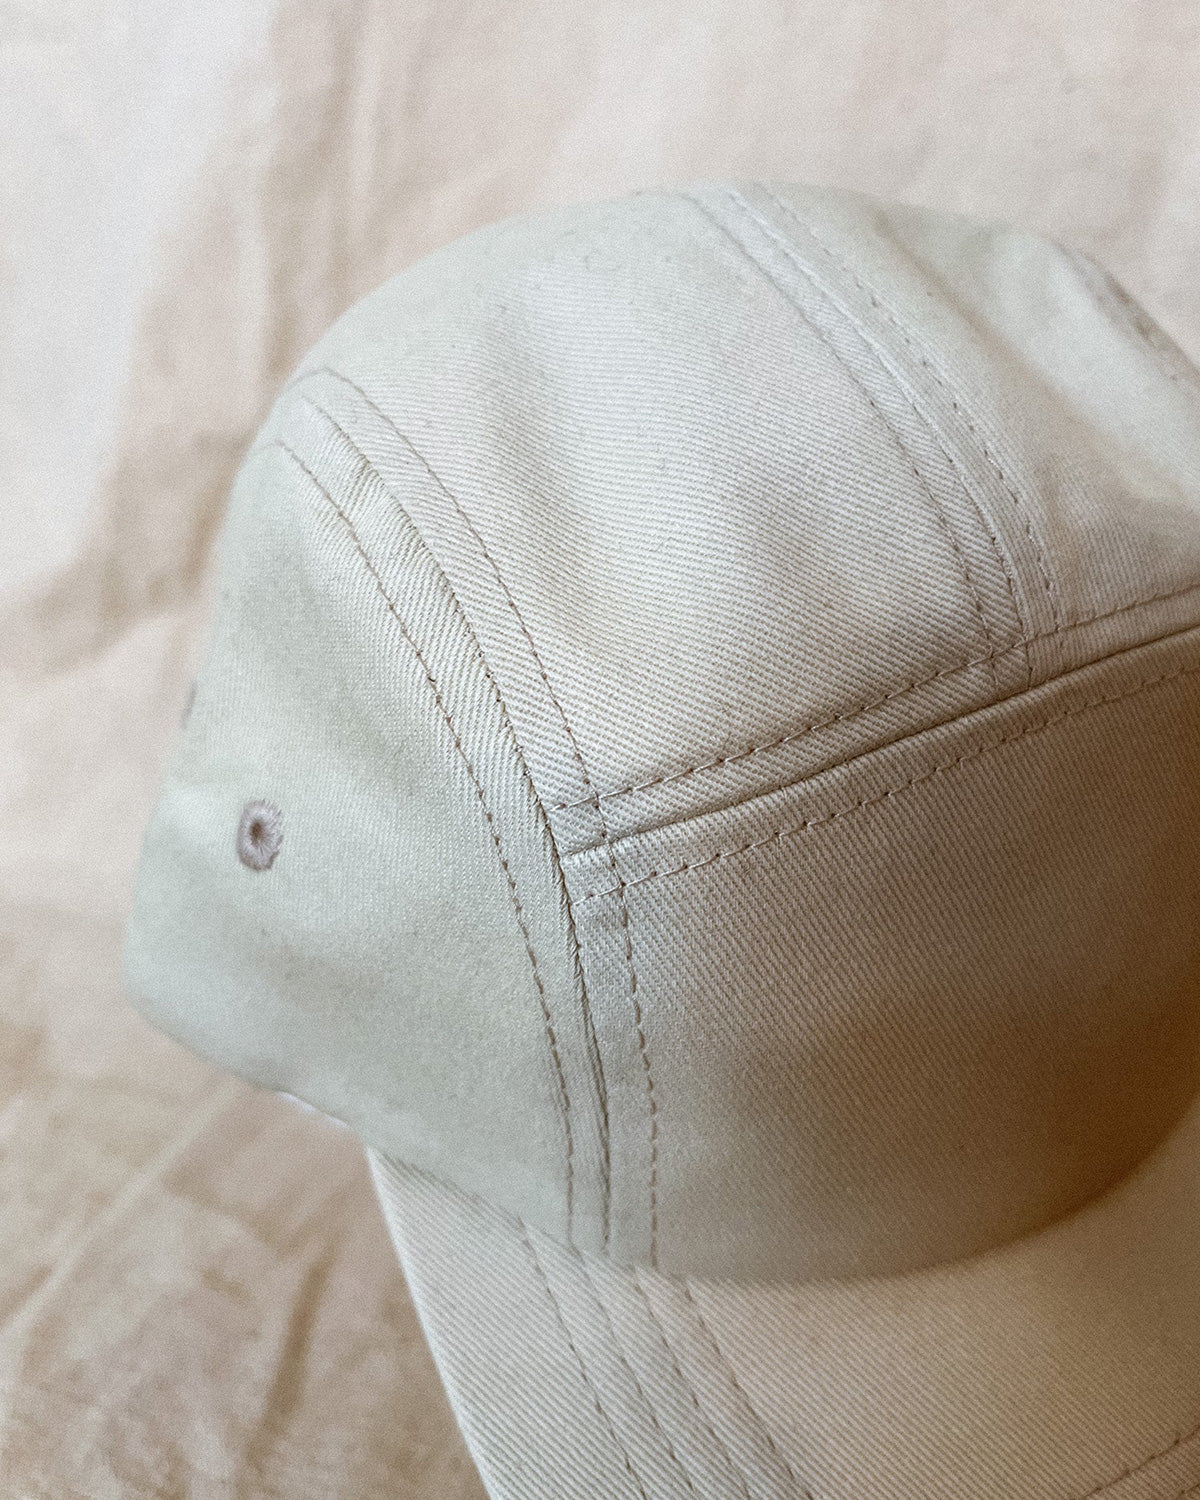 zoom in view of the milky panel hat